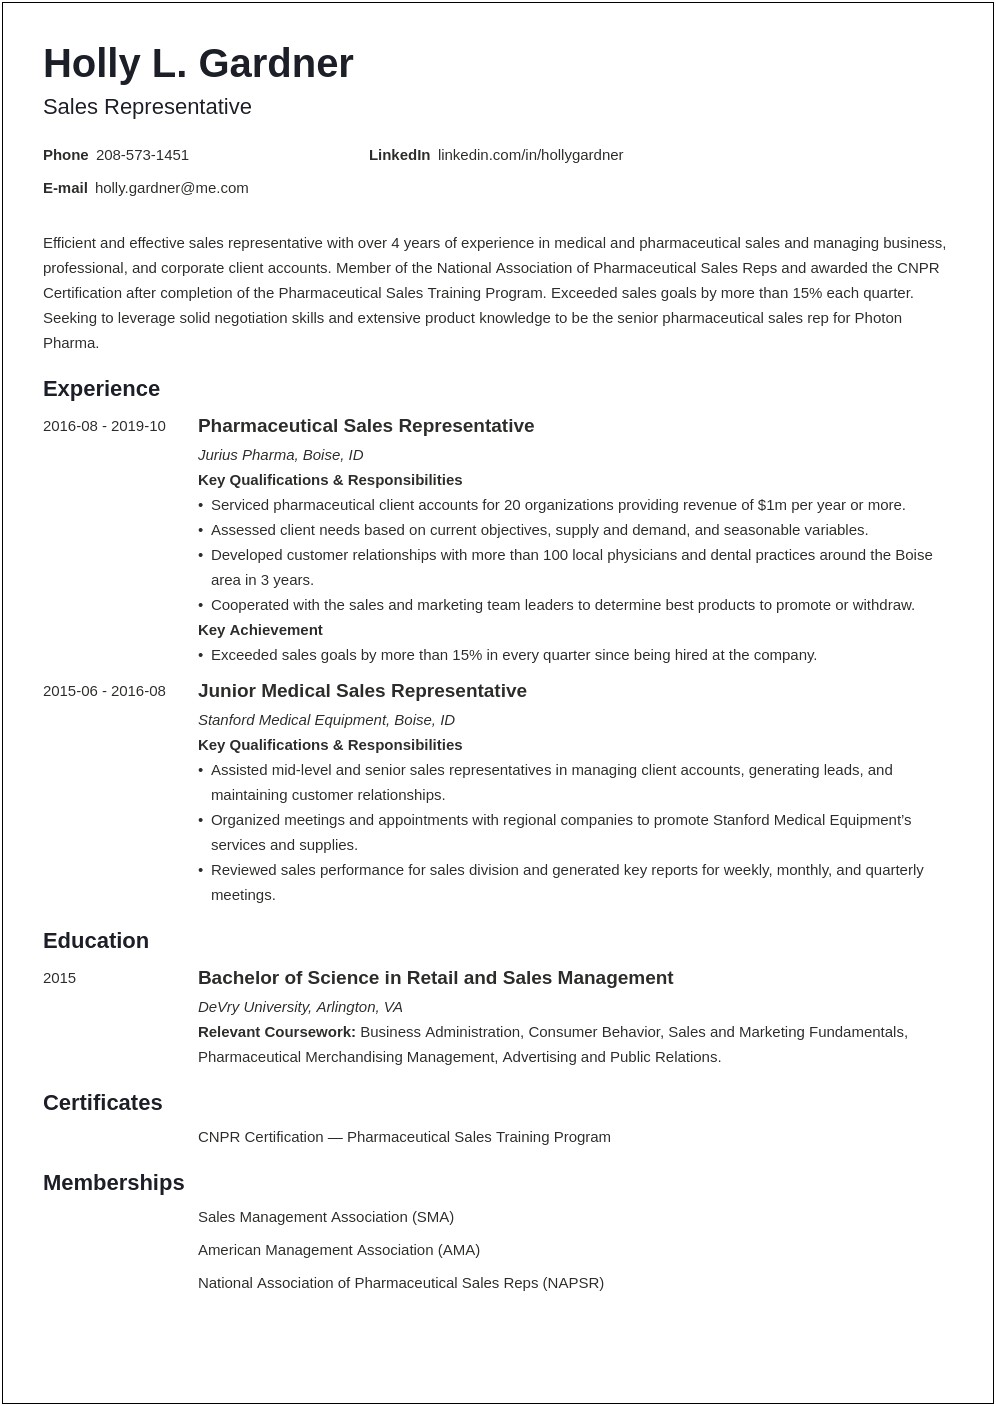 Resume Objective Examples Entry Level Sales